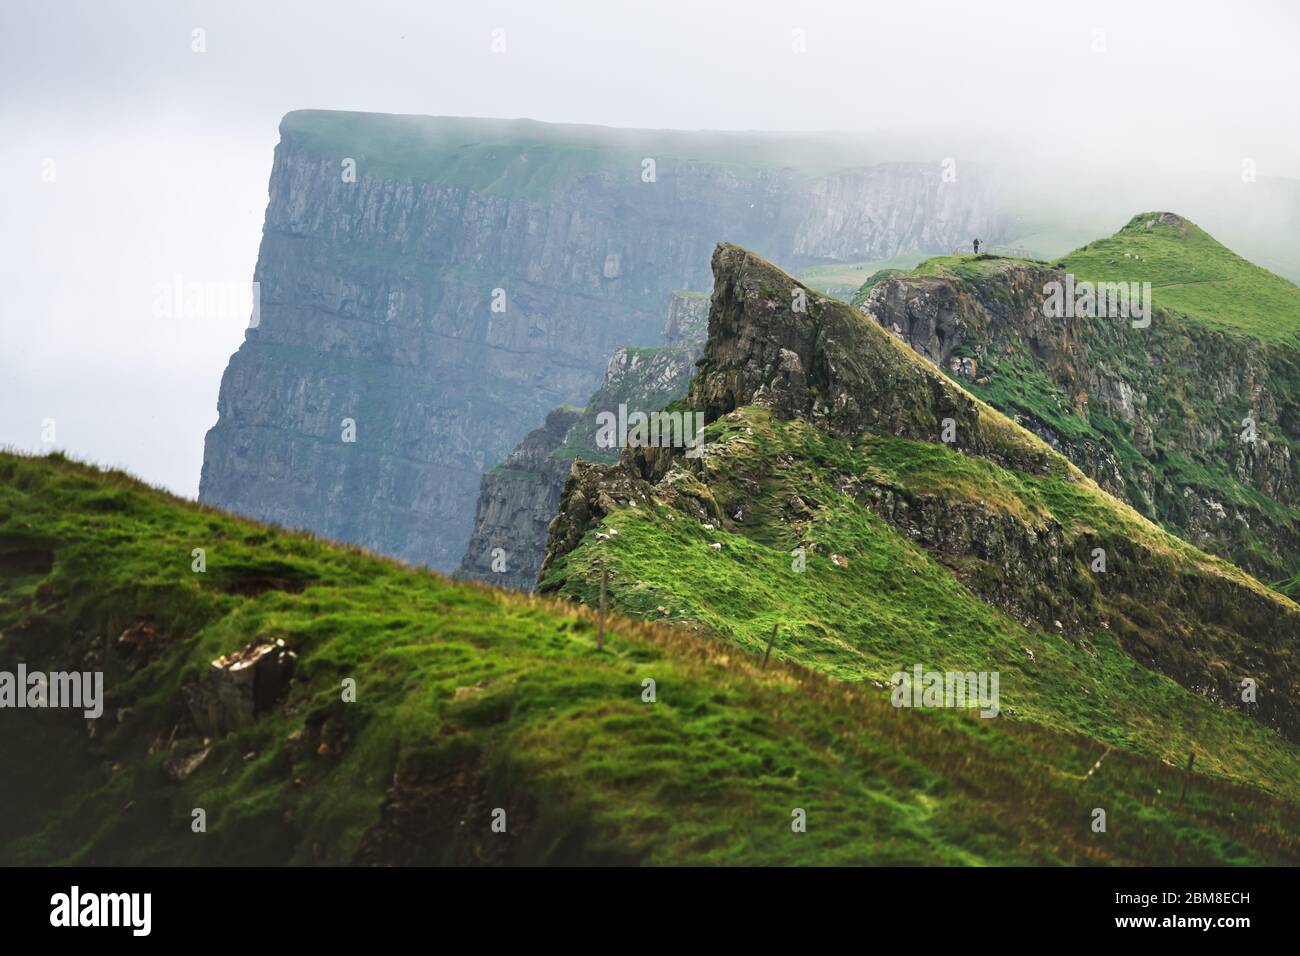 Foggy view of gorgeous mountains of Mykines island with tourist on high viewpoint. Faroe islands, Denmark. Landscape photography Stock Photo